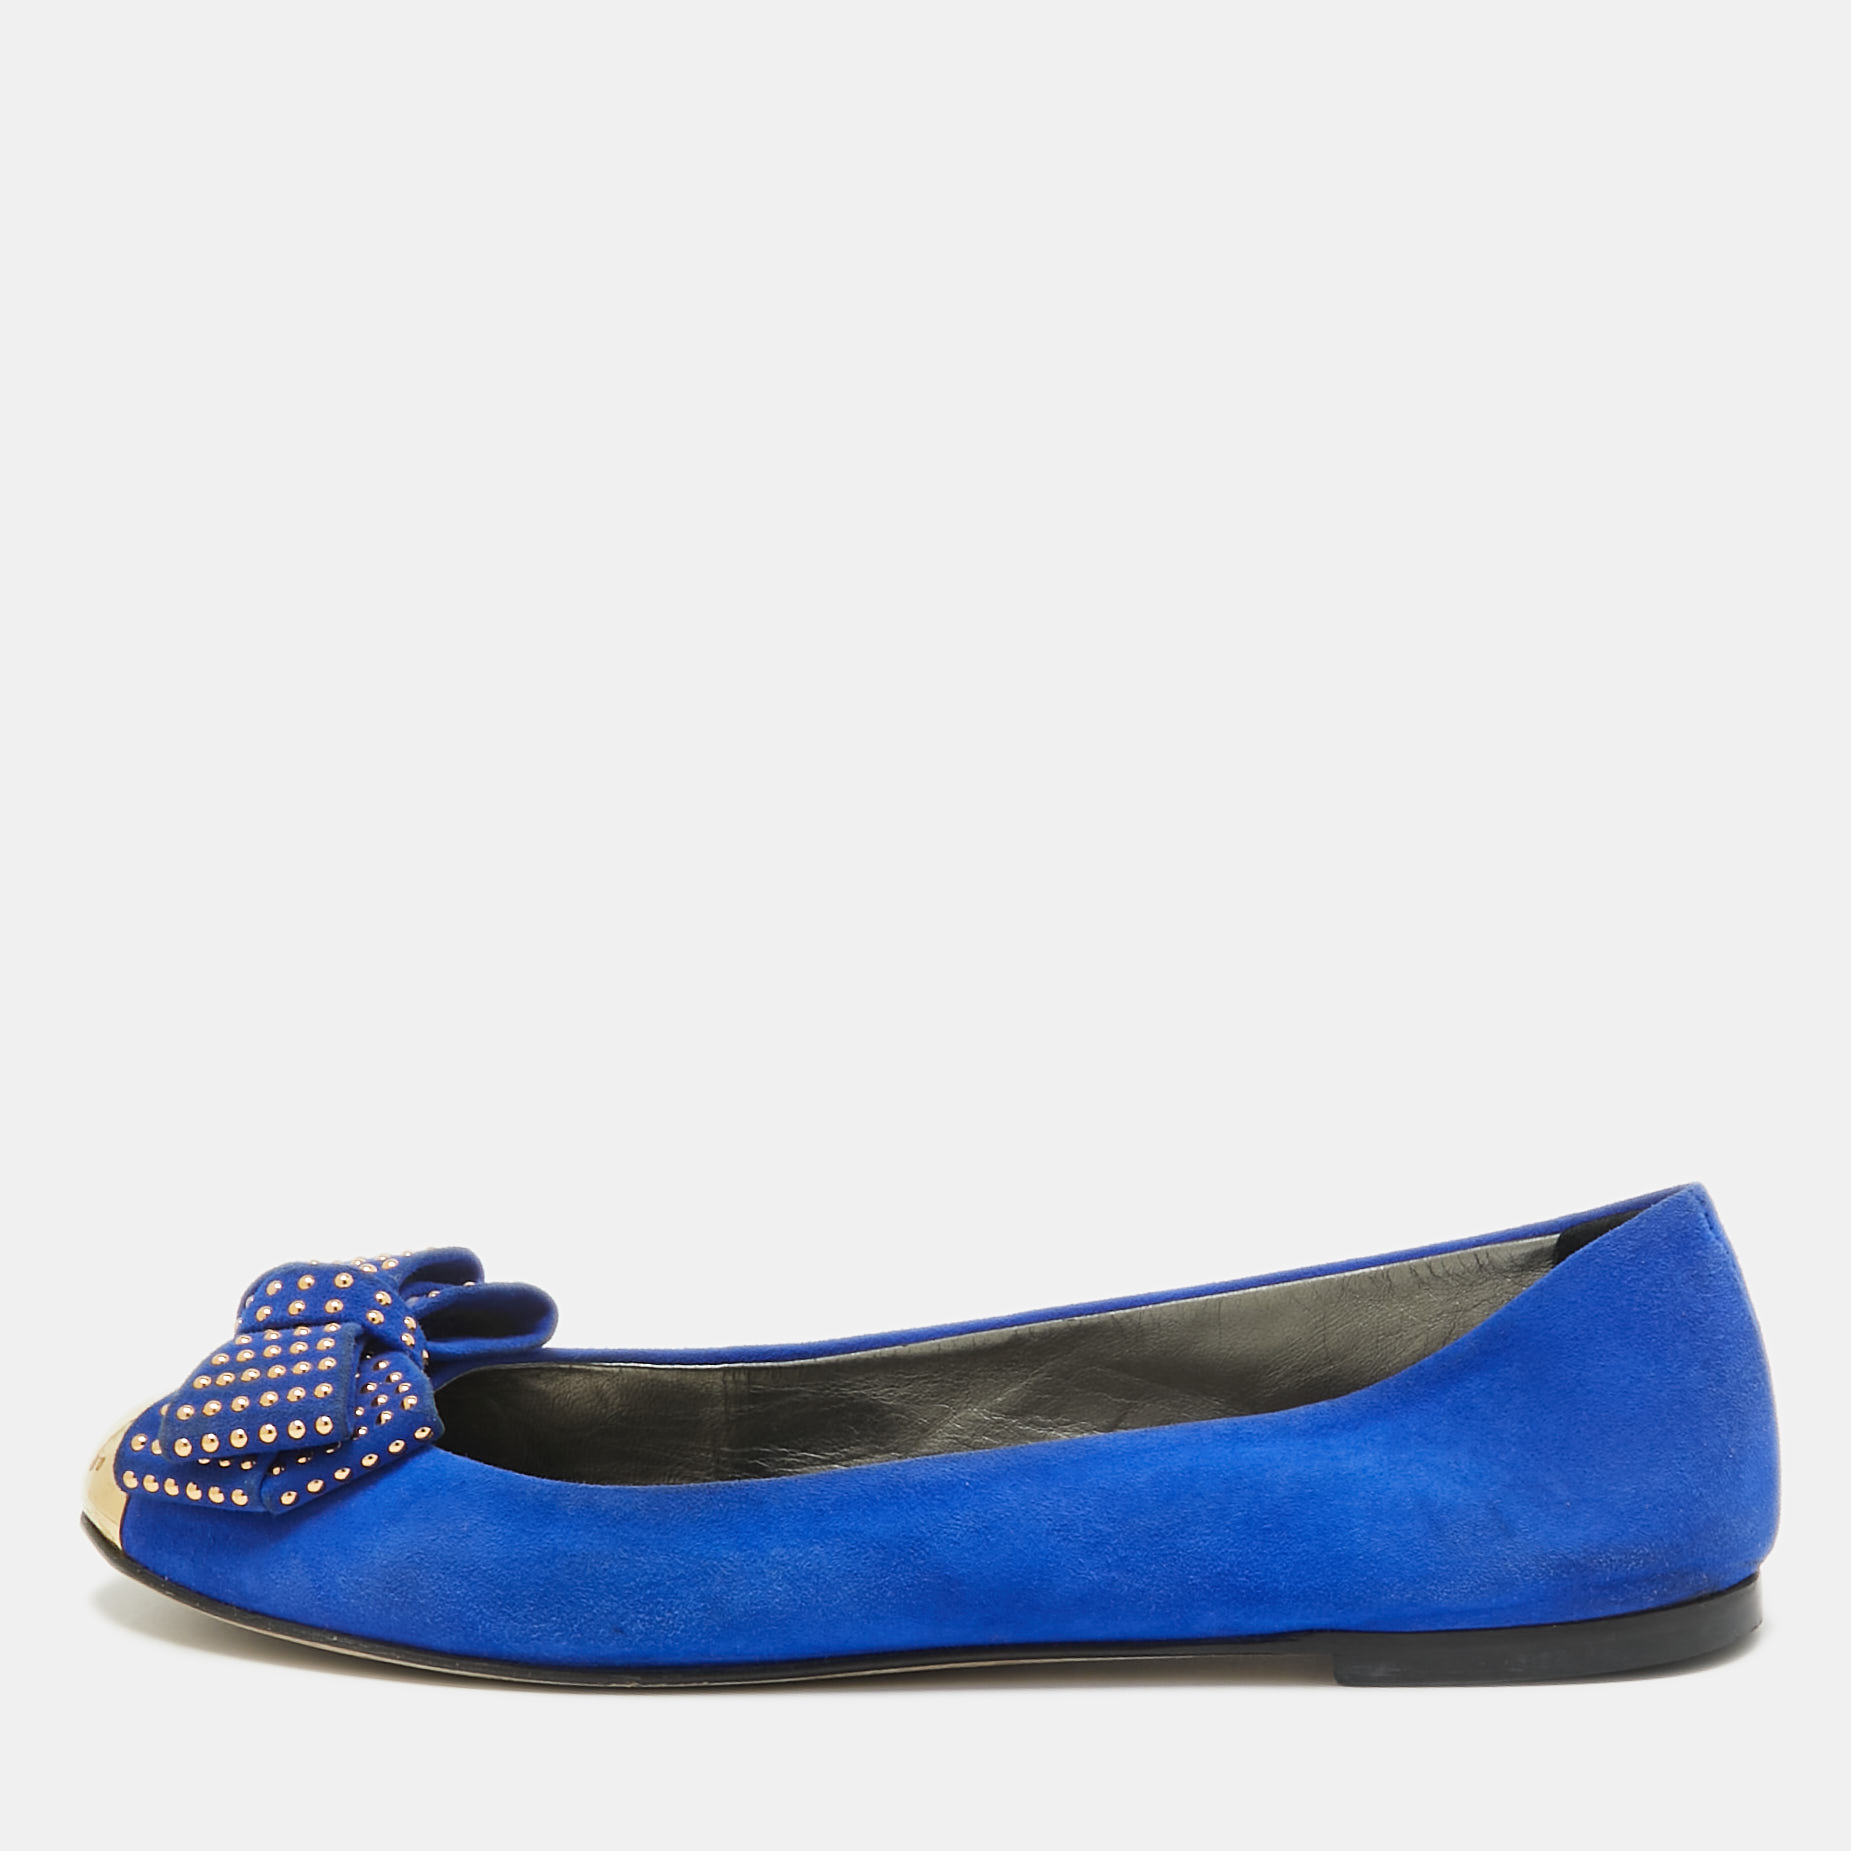 Pre-owned Giuseppe Zanotti Blue Suede And Gold Cap Toe Studded Bow Ballet Flats Size 38.5